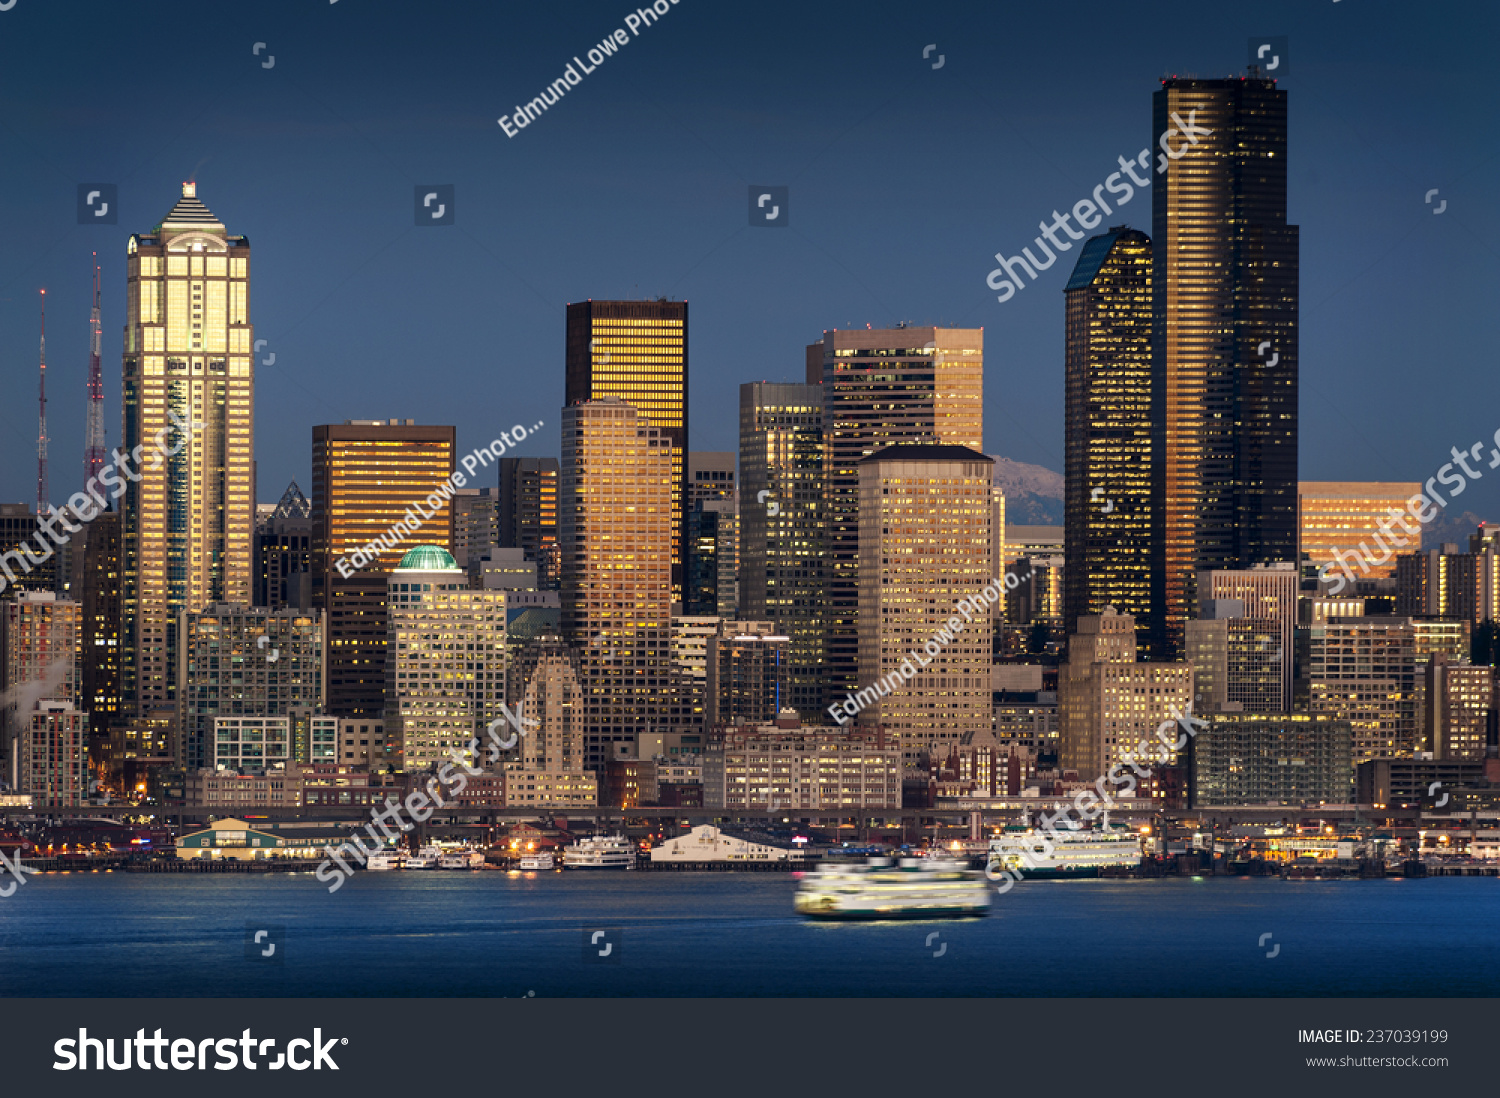 Seattle, Washington Skyline. Shot from West Seattle over Elliott Bay during a dramatic and lovely sunset. Ferryboats cross Elliott Bay heading to Bainbridge Island filled with commuters. #237039199